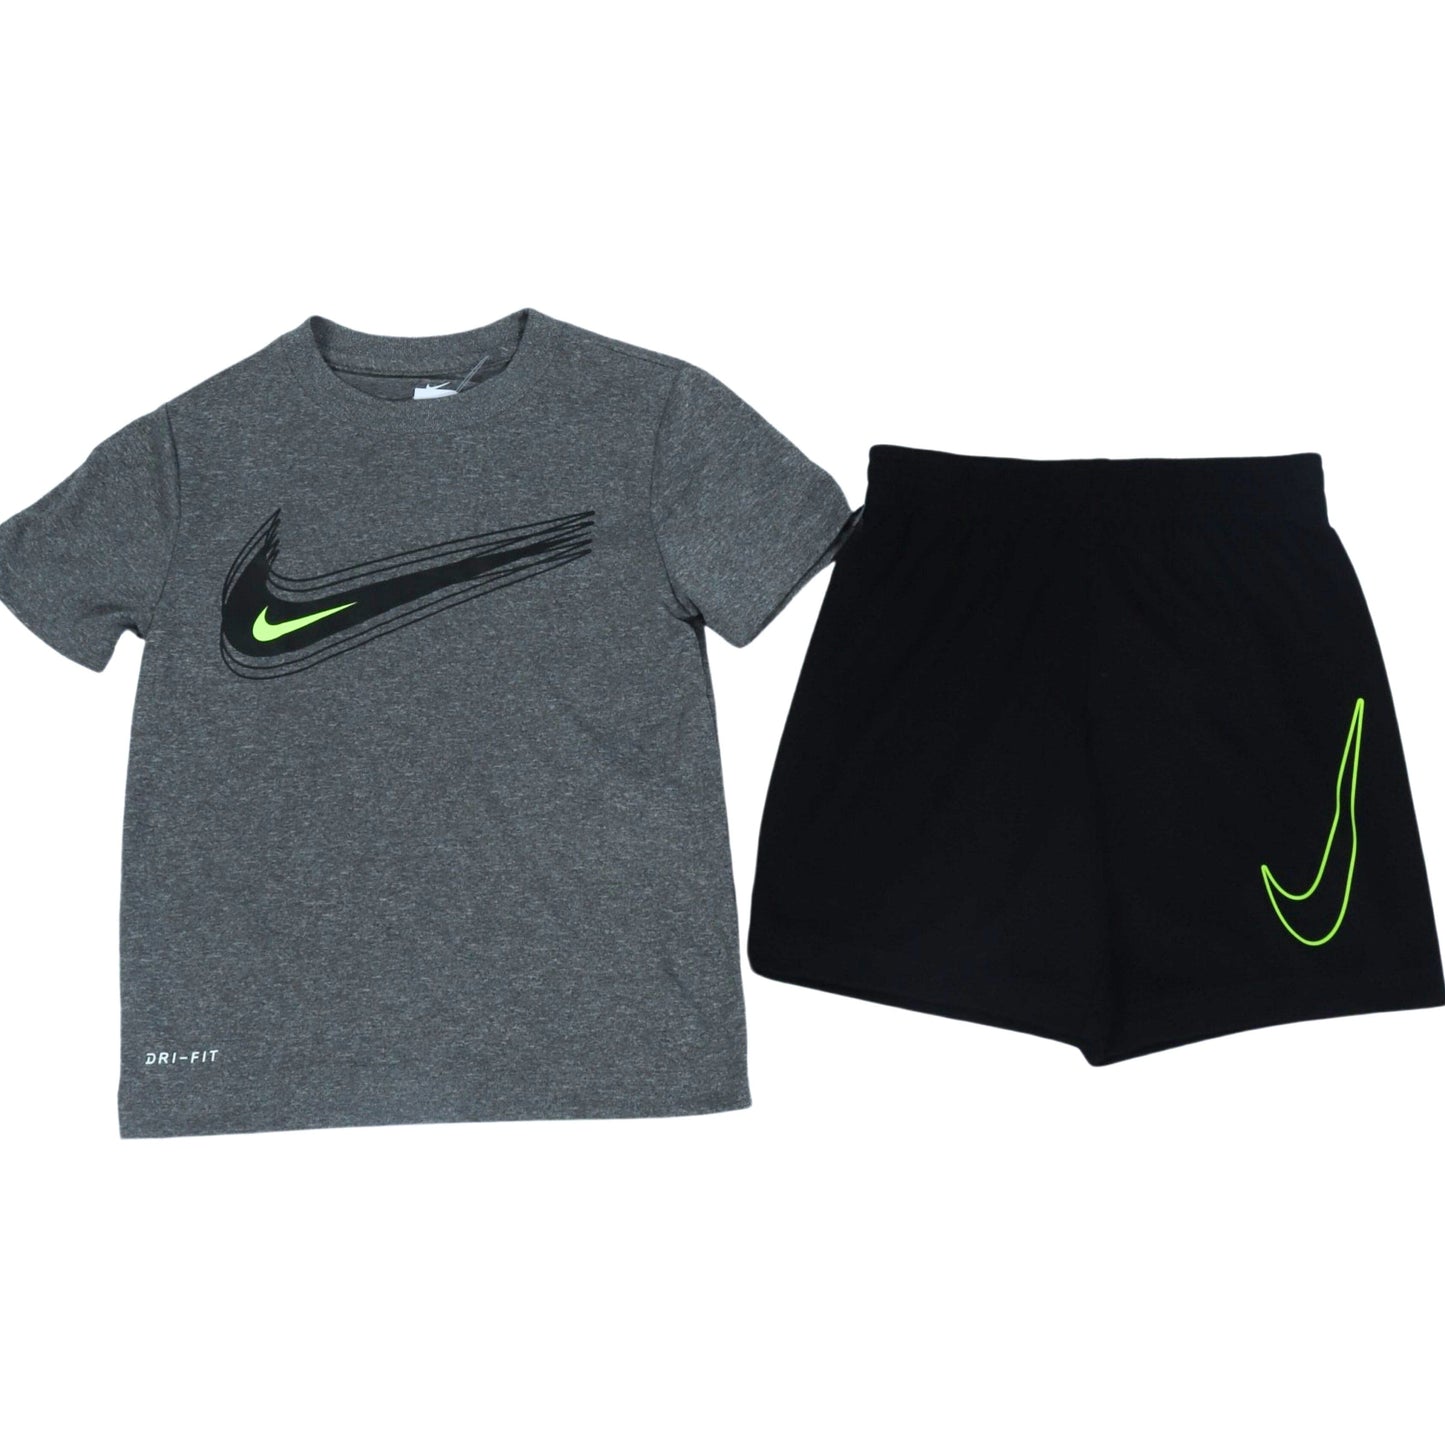 NIKE Baby Boy XS / Multi-Color NIKE - Kids - Front Branded T-Shirt And Shorts Set